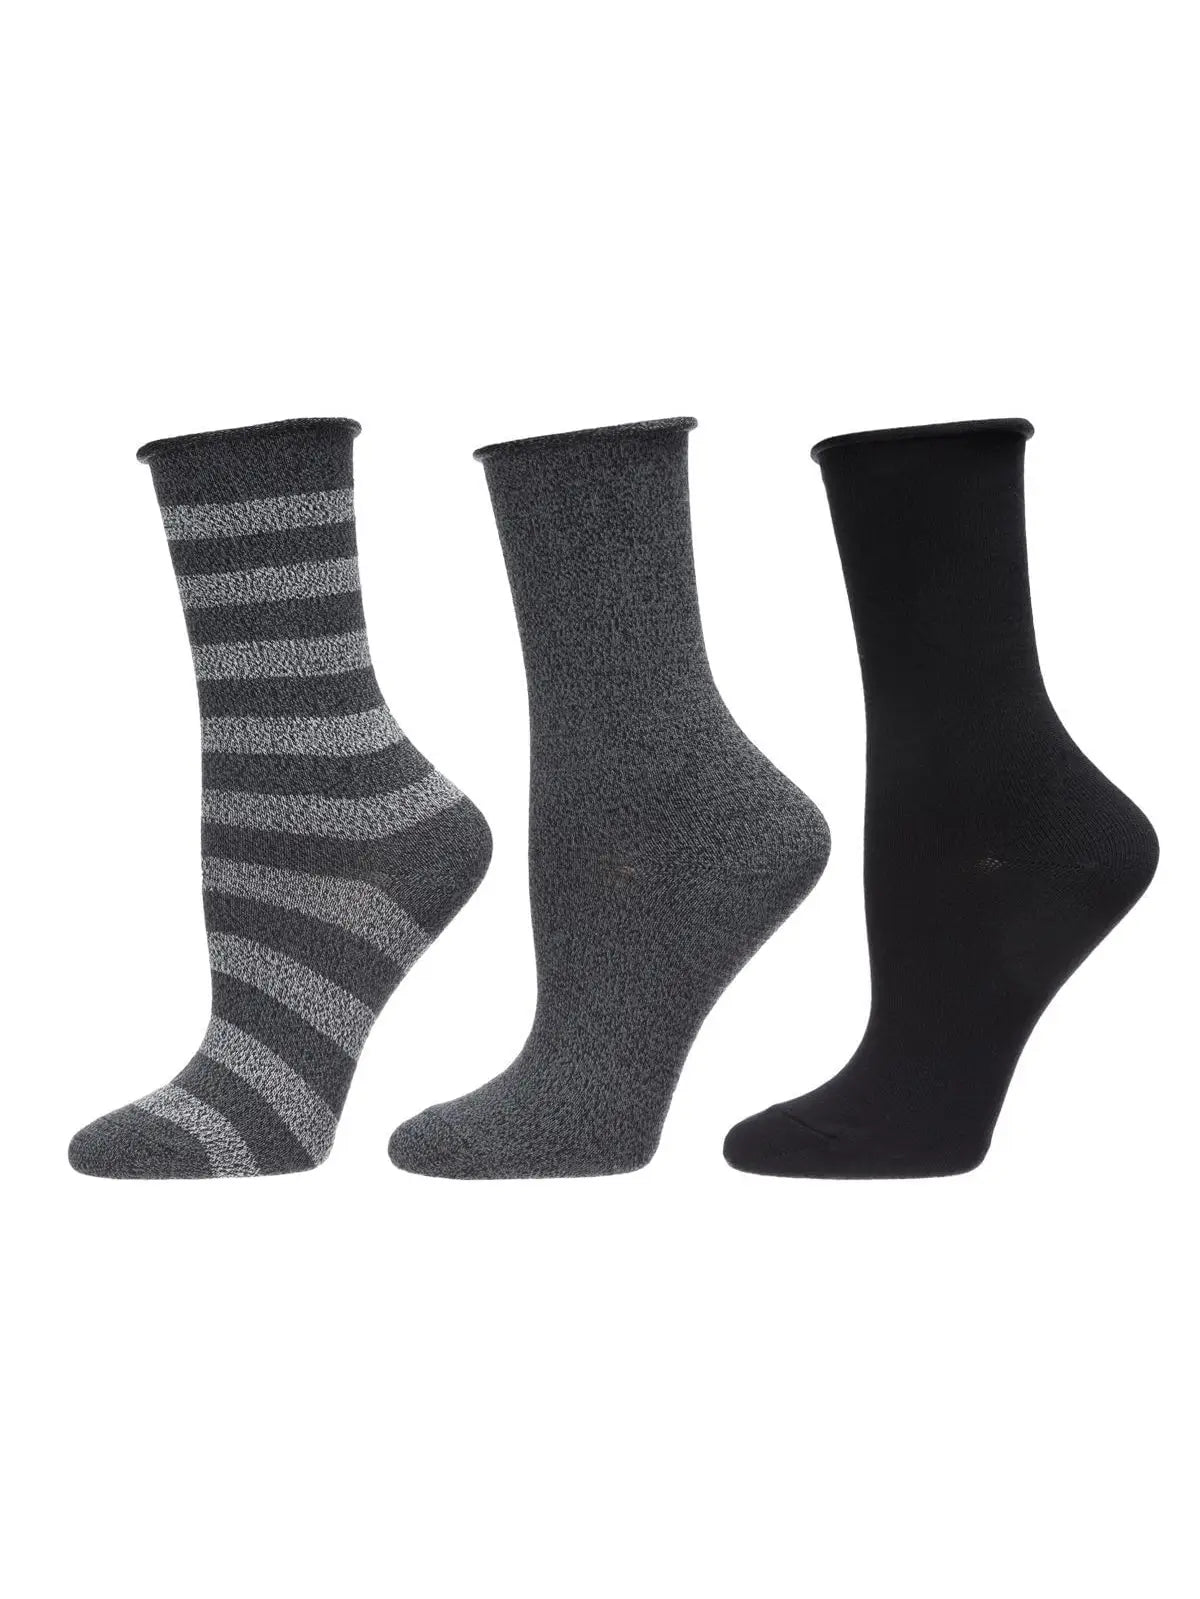 Marled Stripe Roll Top Buttersoft Crew Socks 3 Pair Pack